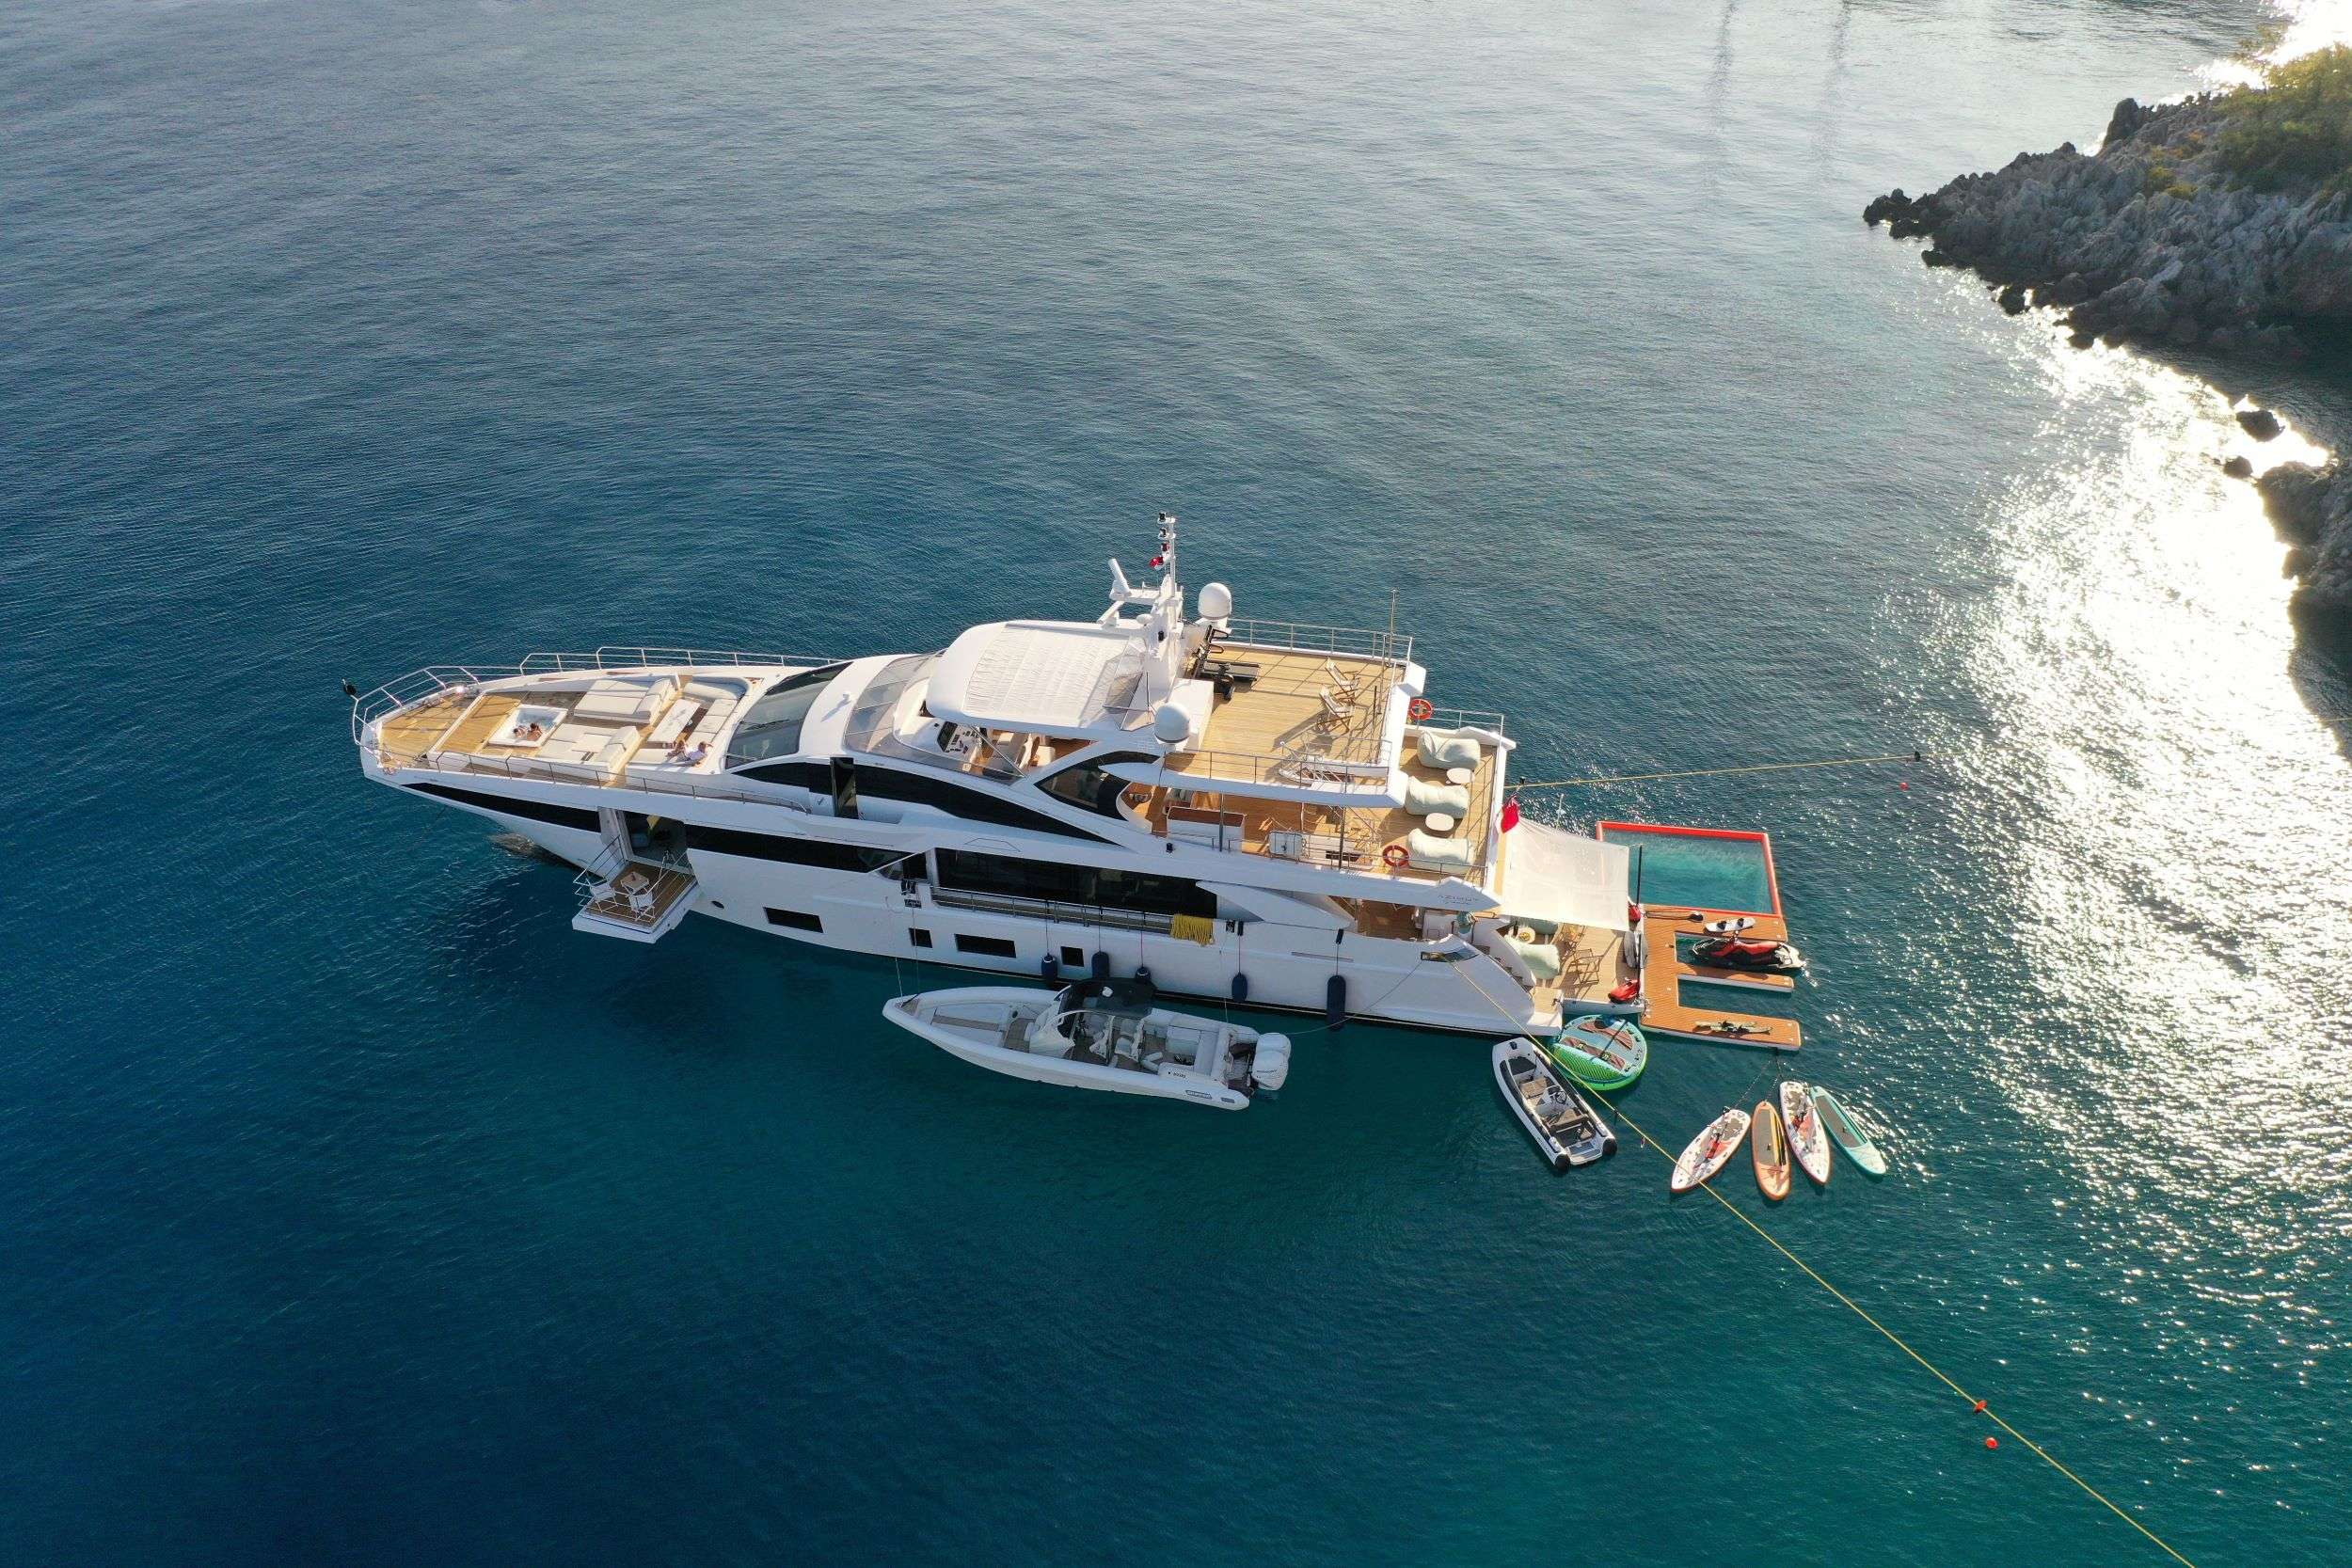 LOVE T - Yacht Charter Siracusa & Boat hire in Summer: Greece | Winter: W. Med -Naples/Sicily 1